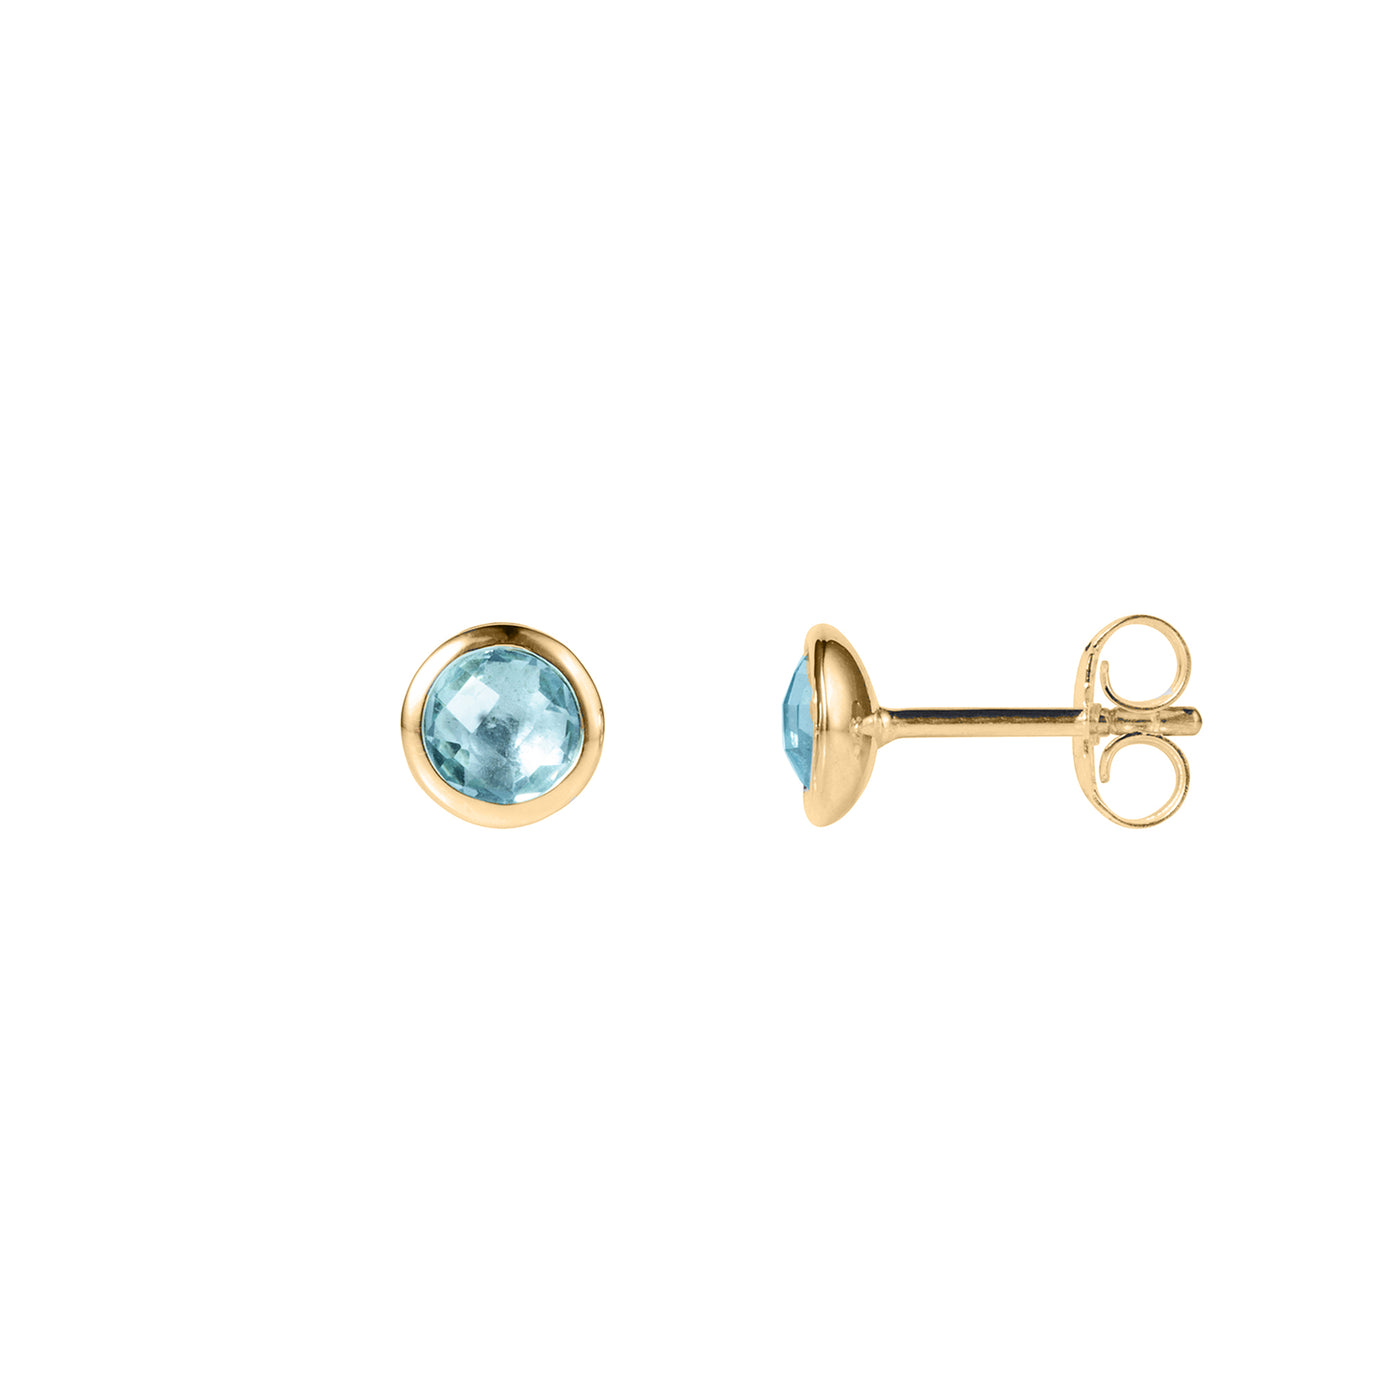 Photo of Gold and Blue Topaz Stud Earrings